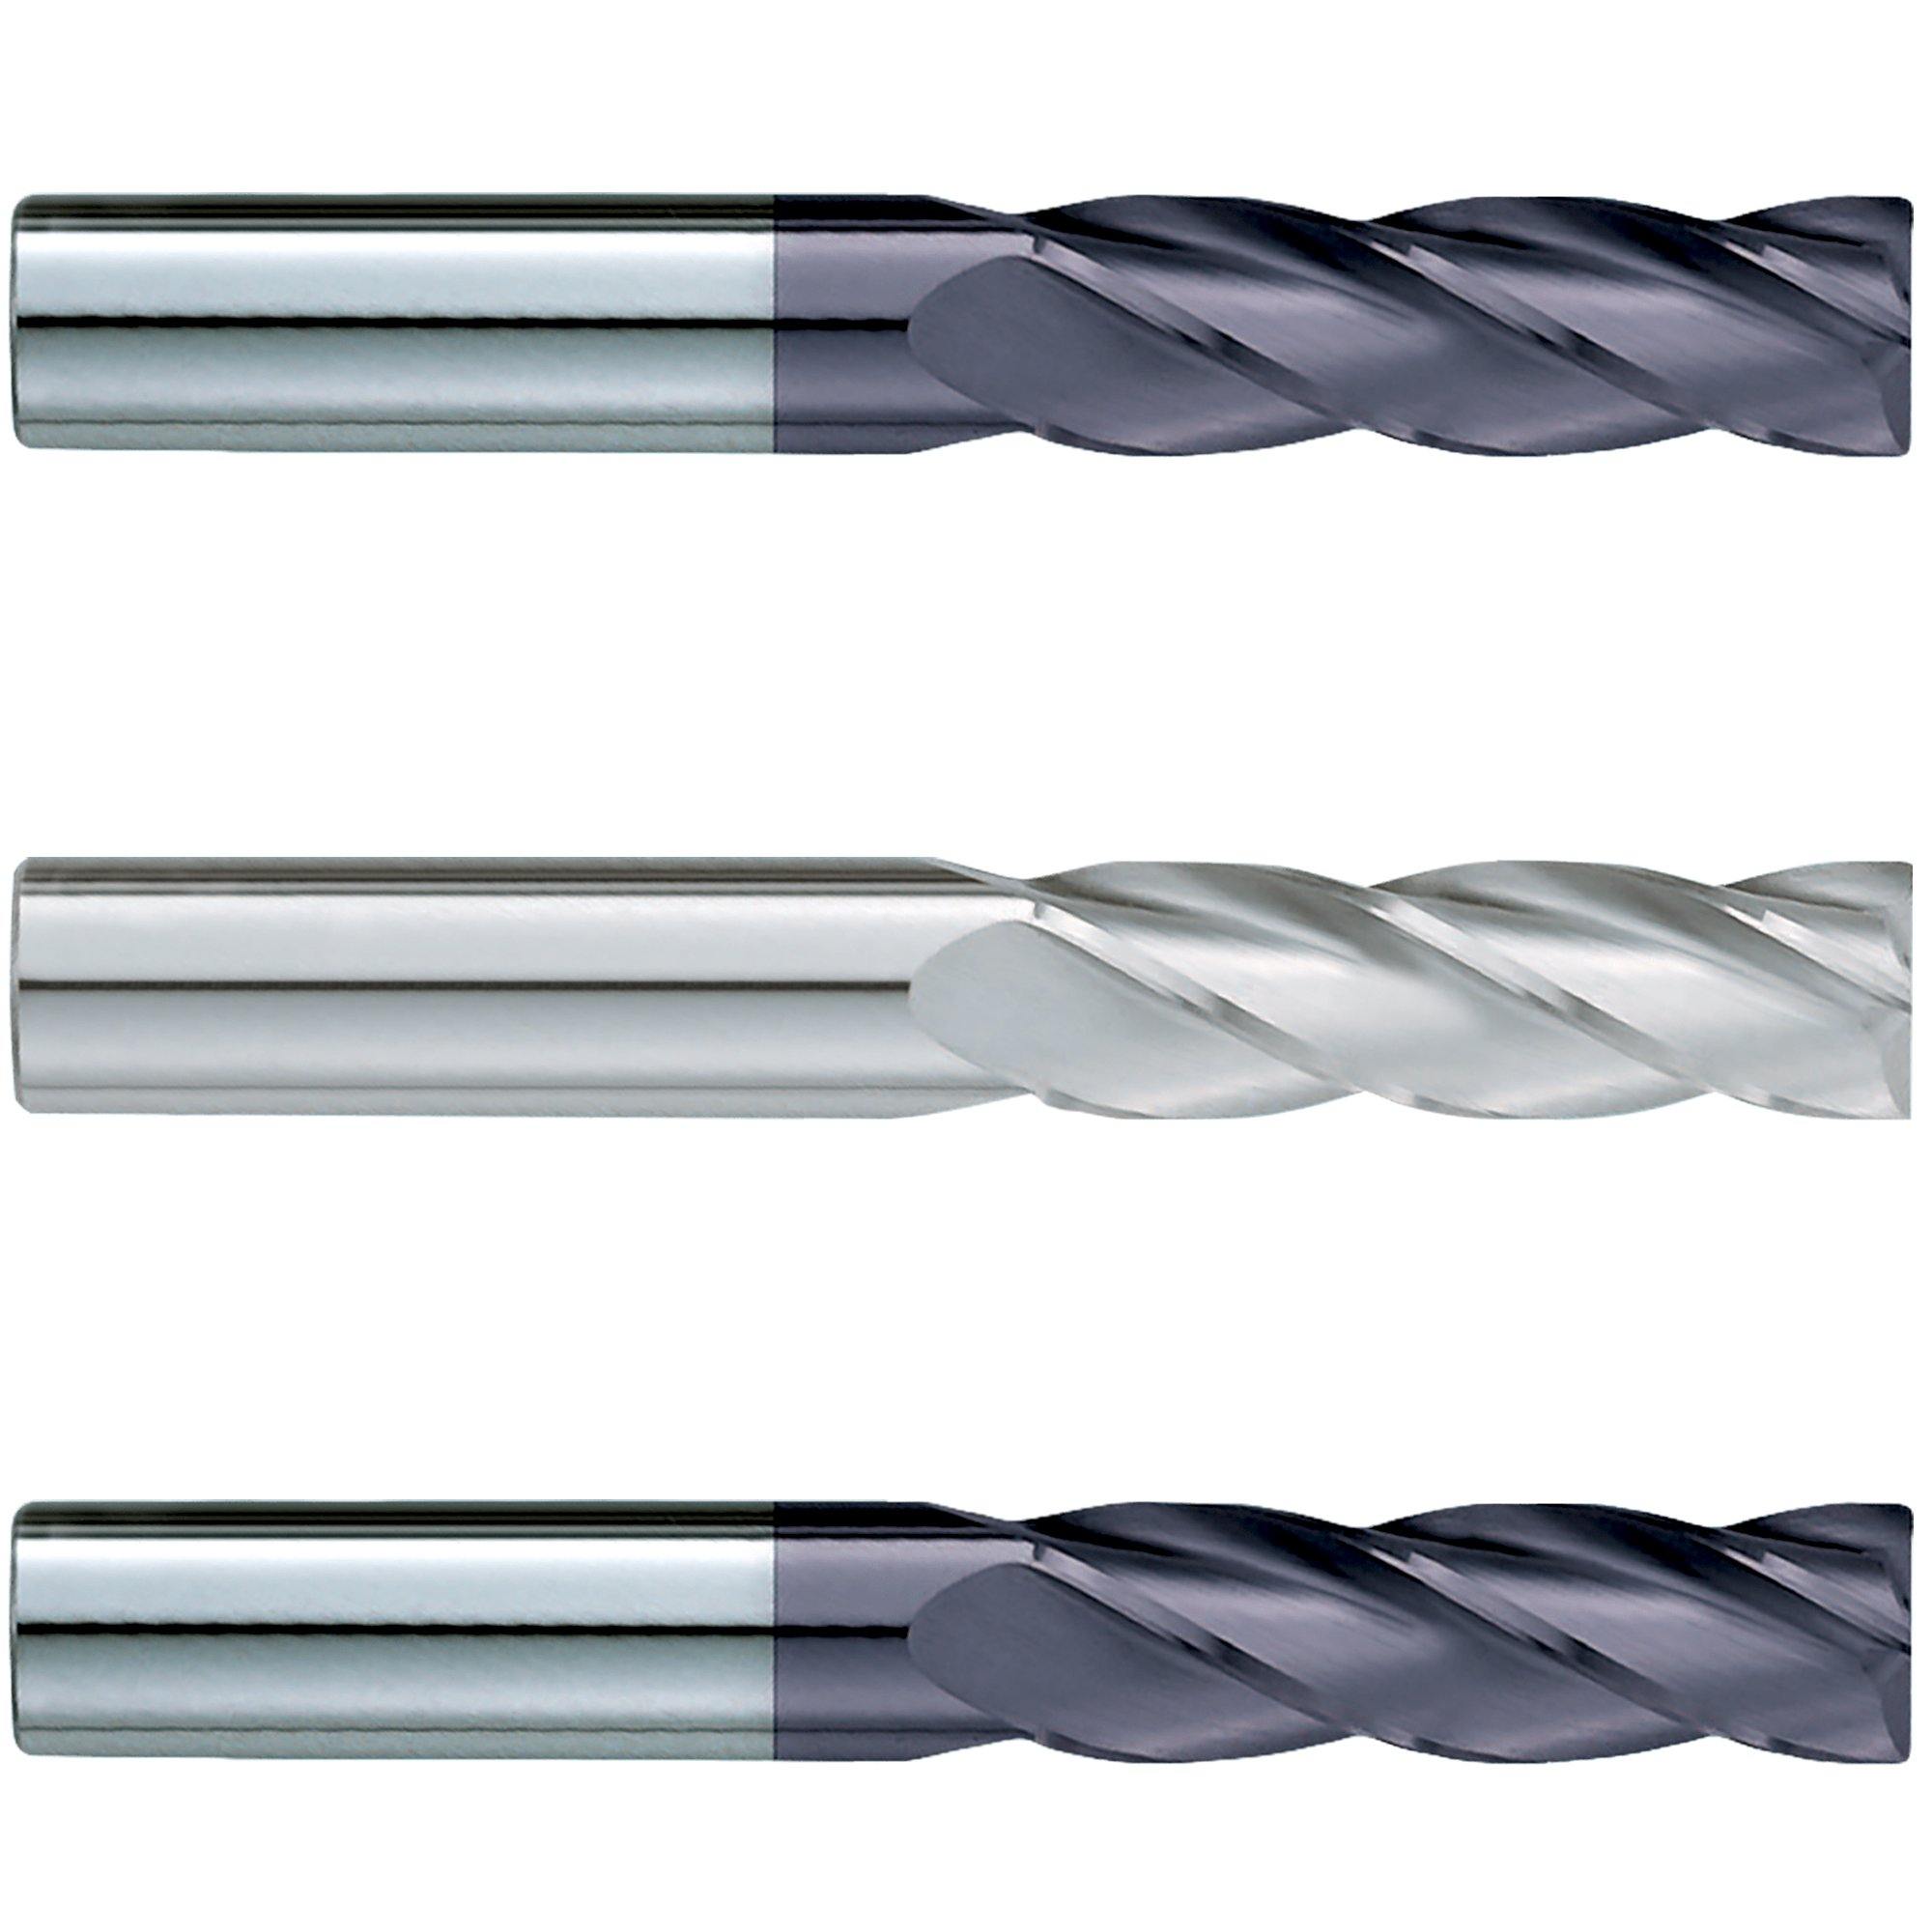 (3 Pack) 7/8" x 5" x 8" Super Long Square Carbide End Mill - The End Mill Store 